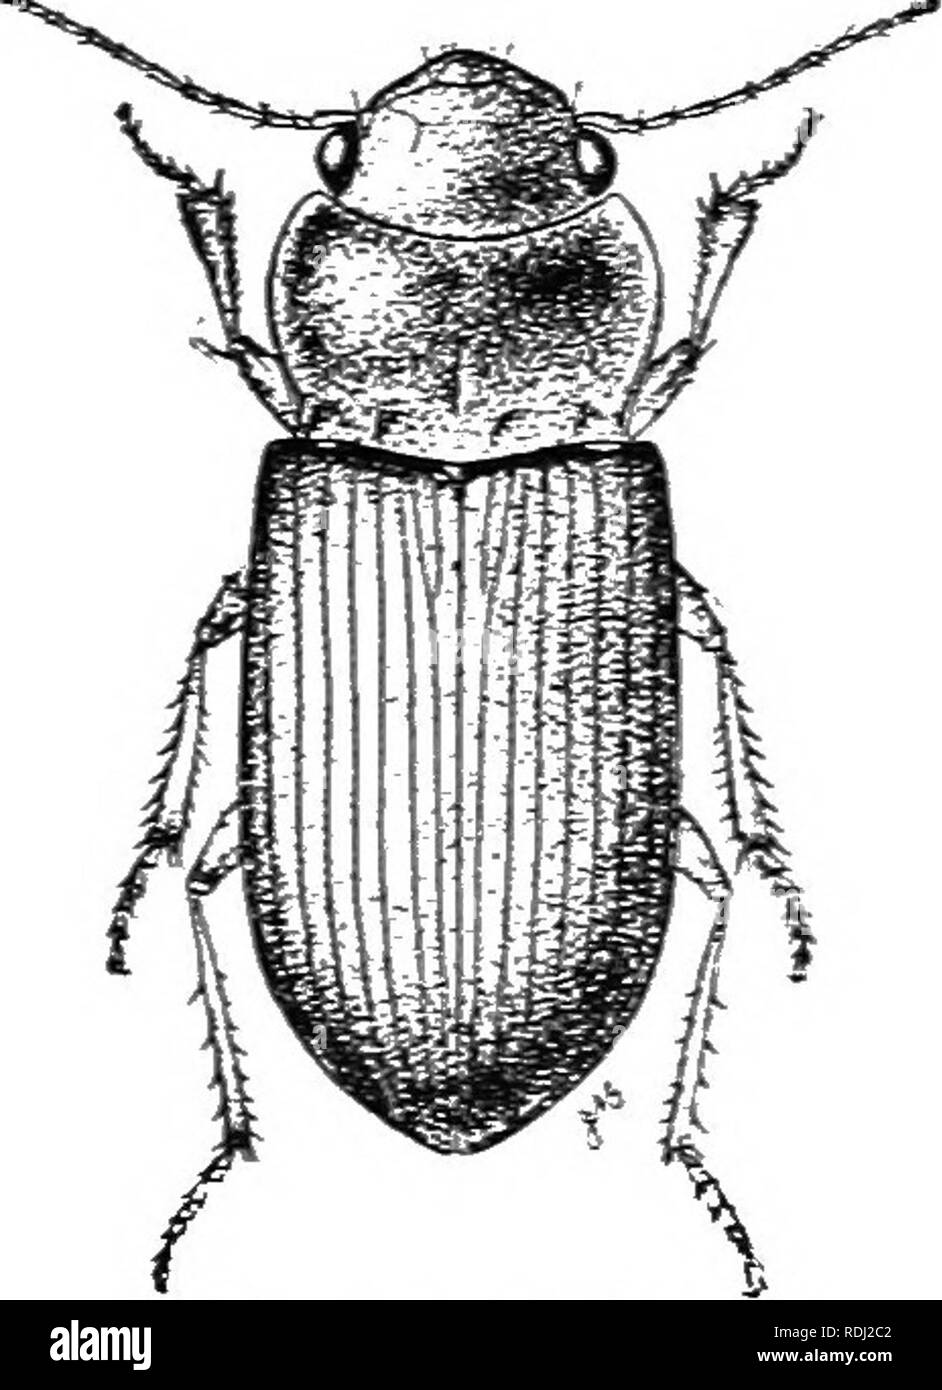 . An illustrated descriptive catalogue of the coleoptera or beetles (exclusive of the Rhynchophora) known to occur in Indiana : with bibliography and descriptions of new species . Beetles. 104 FAitILT II.- 'ababtt&gt;;f.. 153 (liiHi. Amaba exaeata Dej., Spei-., III. 1^2S. 50&quot;.J. Oblong-uval, r.'bii^r. very convex. Blacki^li-pkeous. sliinliiir: auteniiii- and l^s reddish-brown, the former as long as the head and thorax. Thorax snbquadrate, about one-half wider than long, basal impressions broad, donble, pnnctured; hind augle small, aente, very obtusely carinate. Elytra slightly wider than Stock Photo